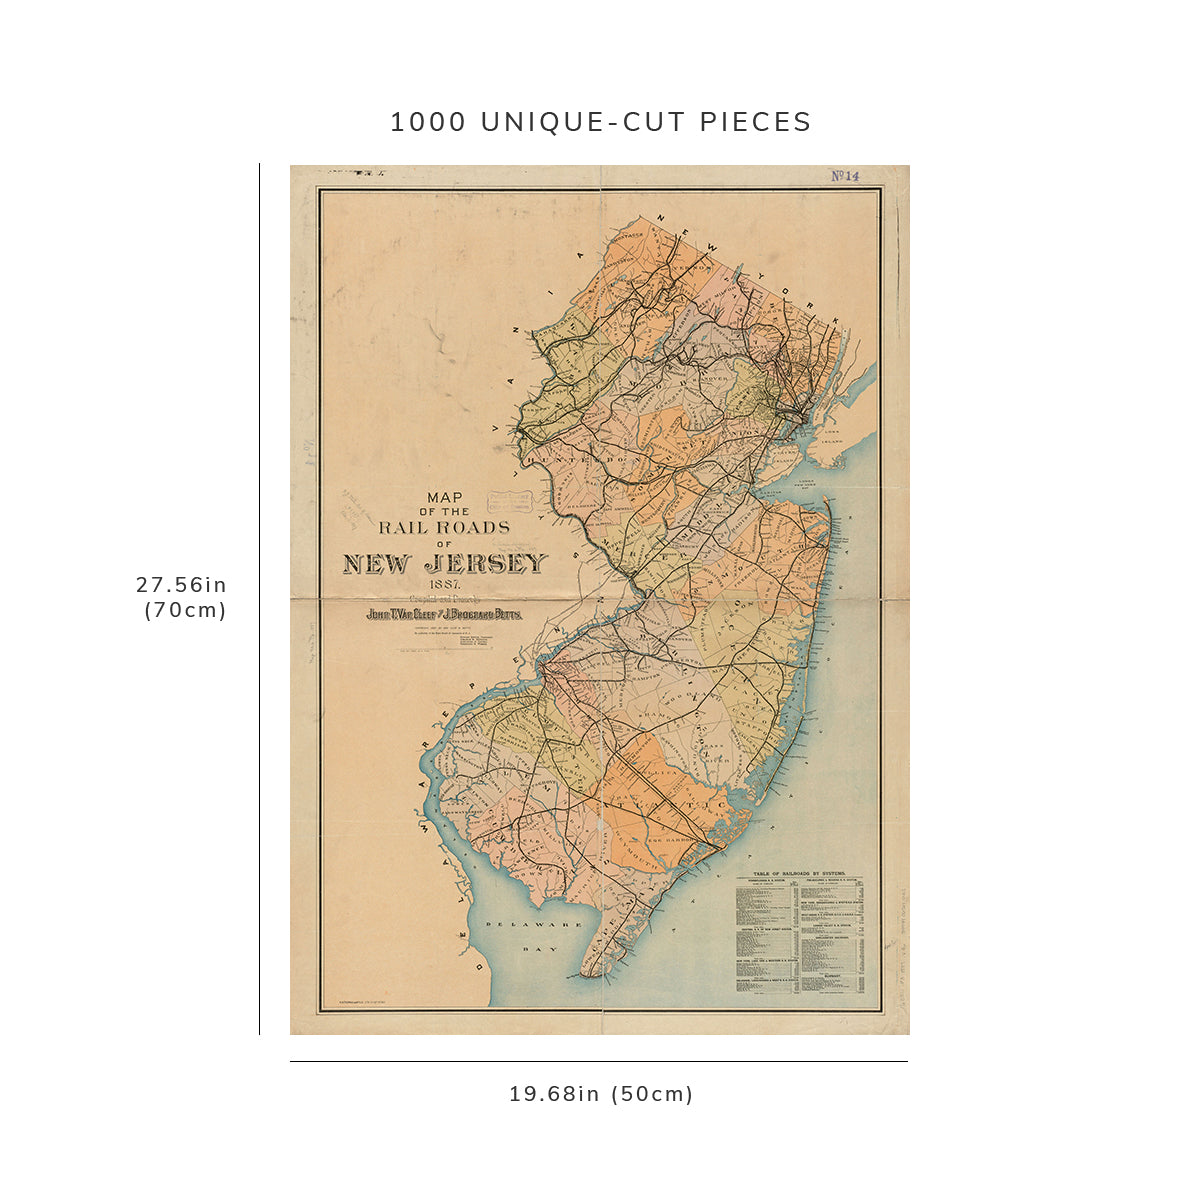 1000 Piece Jigsaw Puzzle: 1887 Map | Map of the rail roads of New Jersey 1887 | Descript